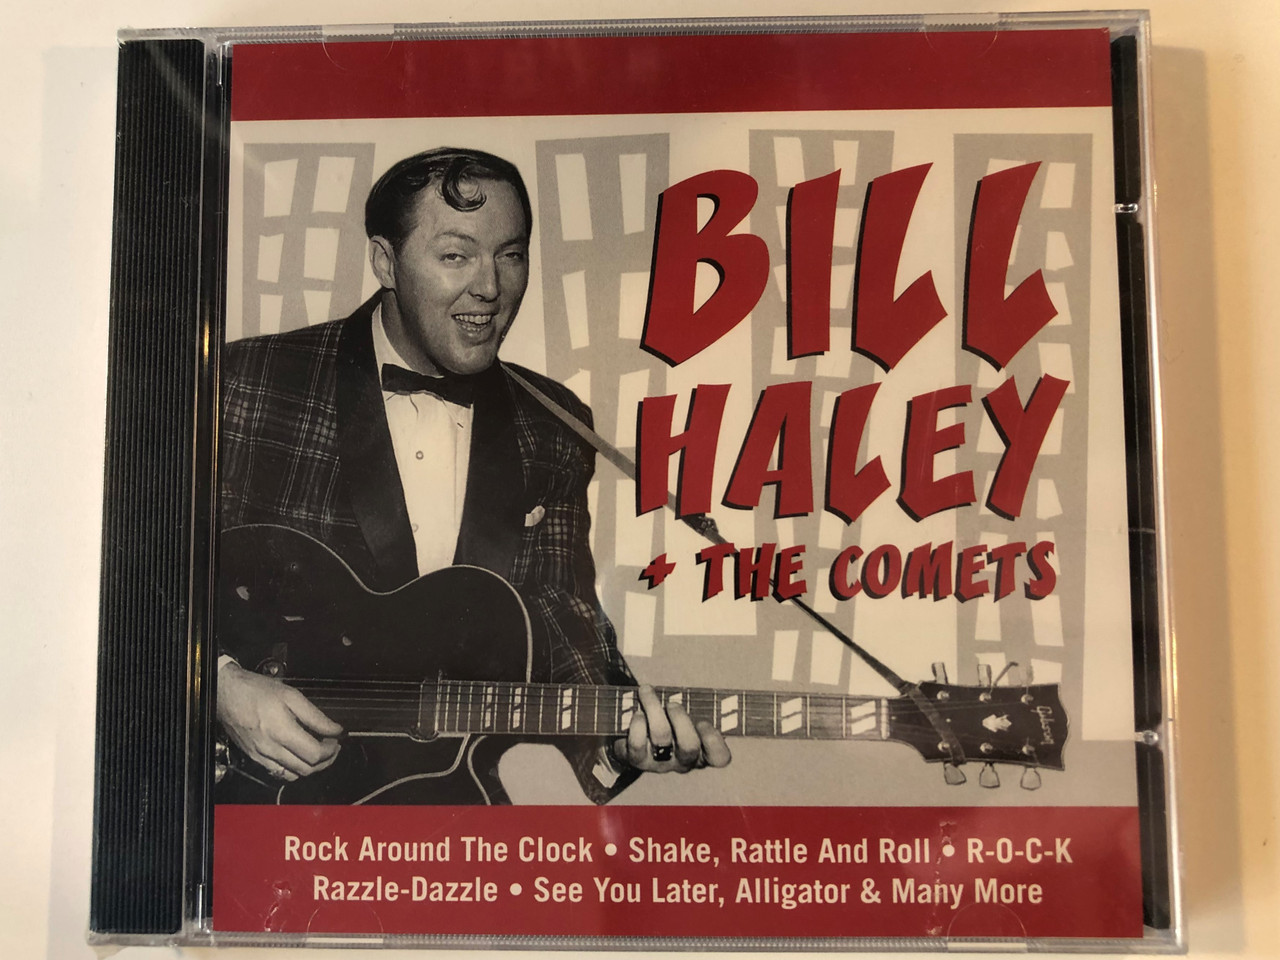 Bill Haley + The Comets / Rock Around The Clock, Shake, Rattle And Roll,  R-O-C-K, Razzle-Dazzle, See You Later, Alligator & Many More / Fox Music  Audio CD / FU 1041 - bibleinmylanguage